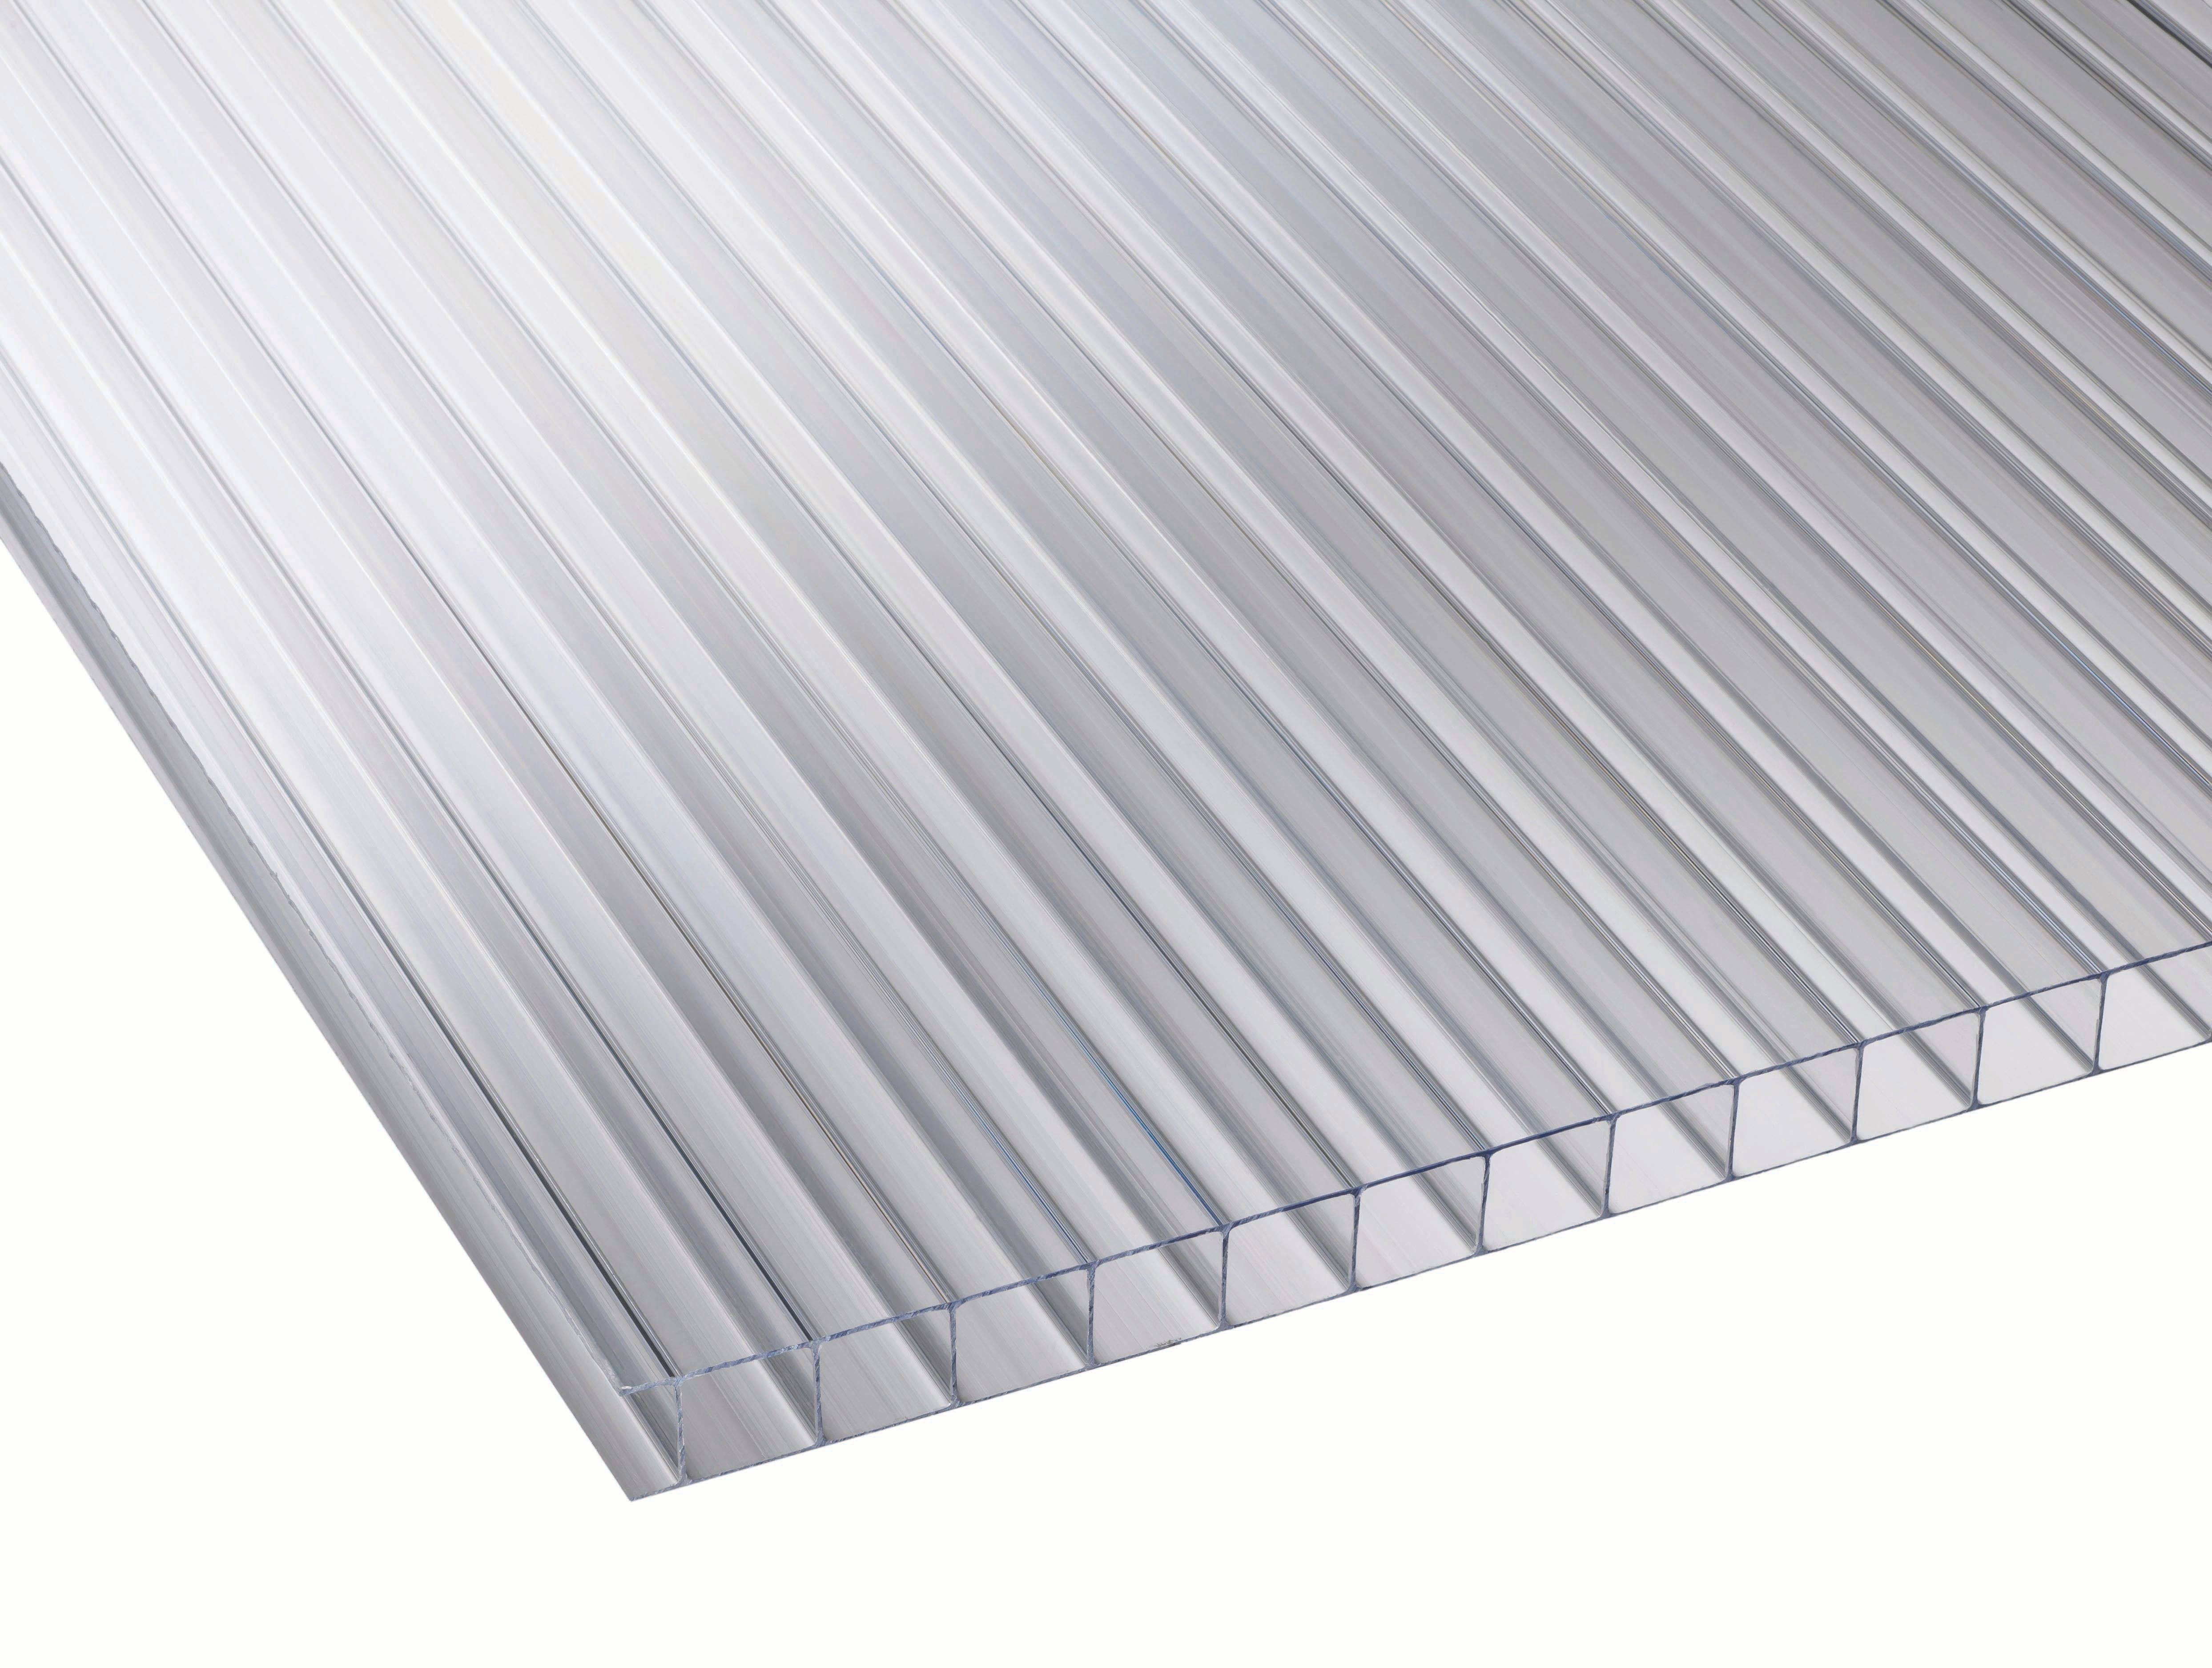 Image of 10mm Clear Multiwall Polycarbonate Sheet - 2500 x 1220mm